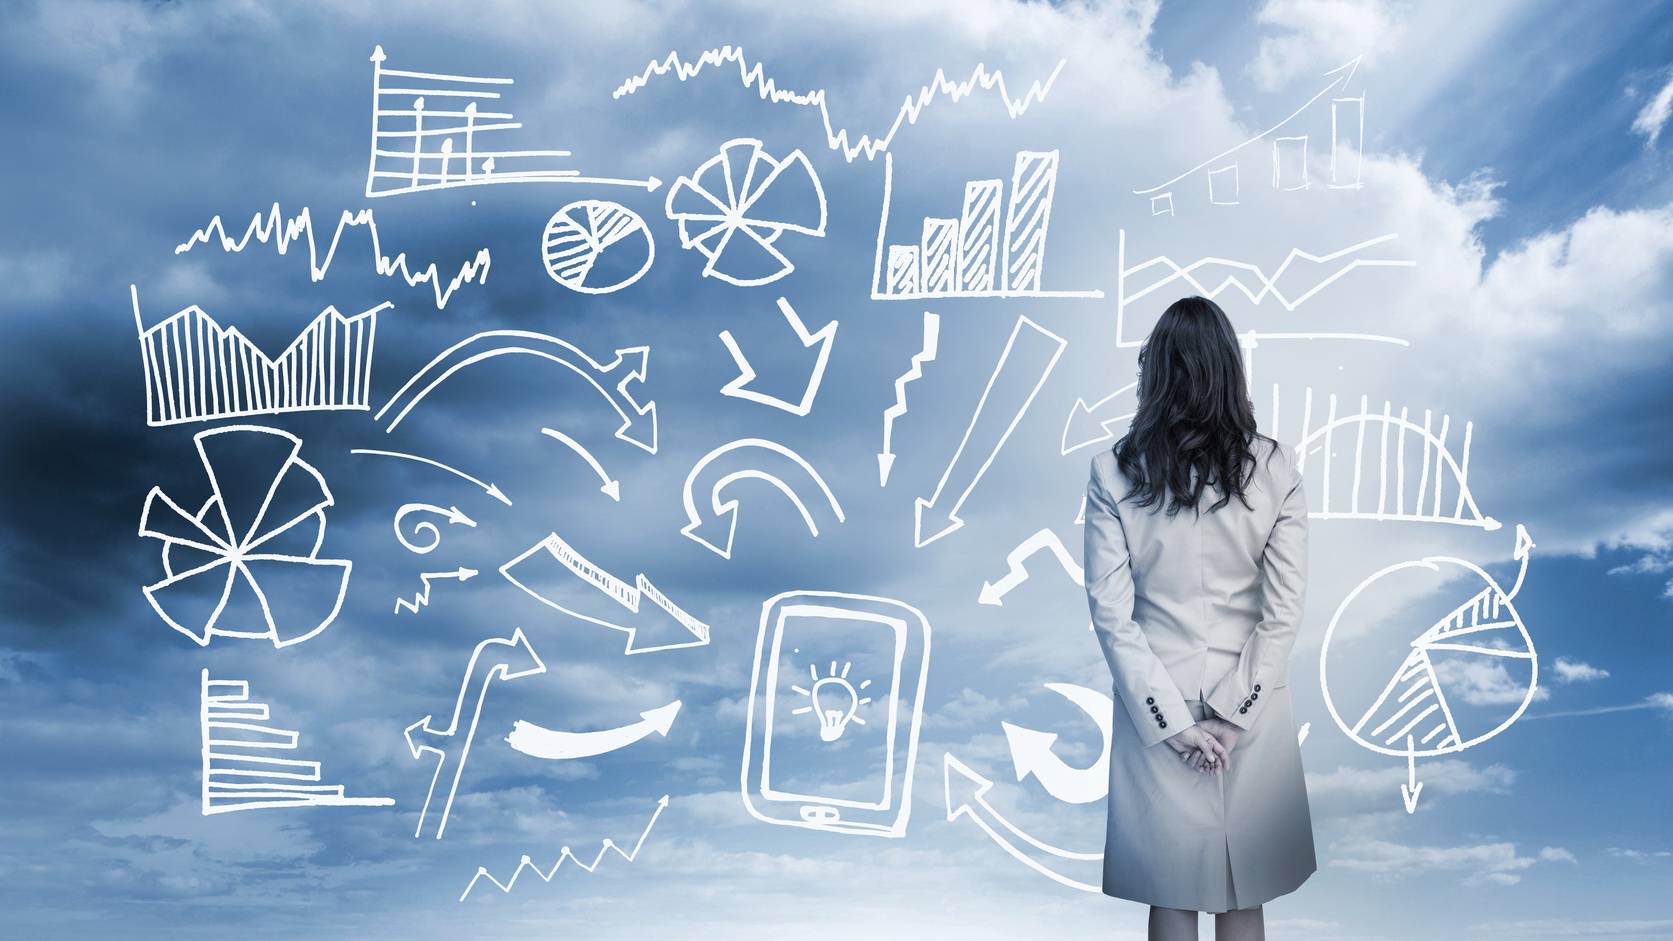 Businesswoman standing looking at data flowchart in cloudy landscape